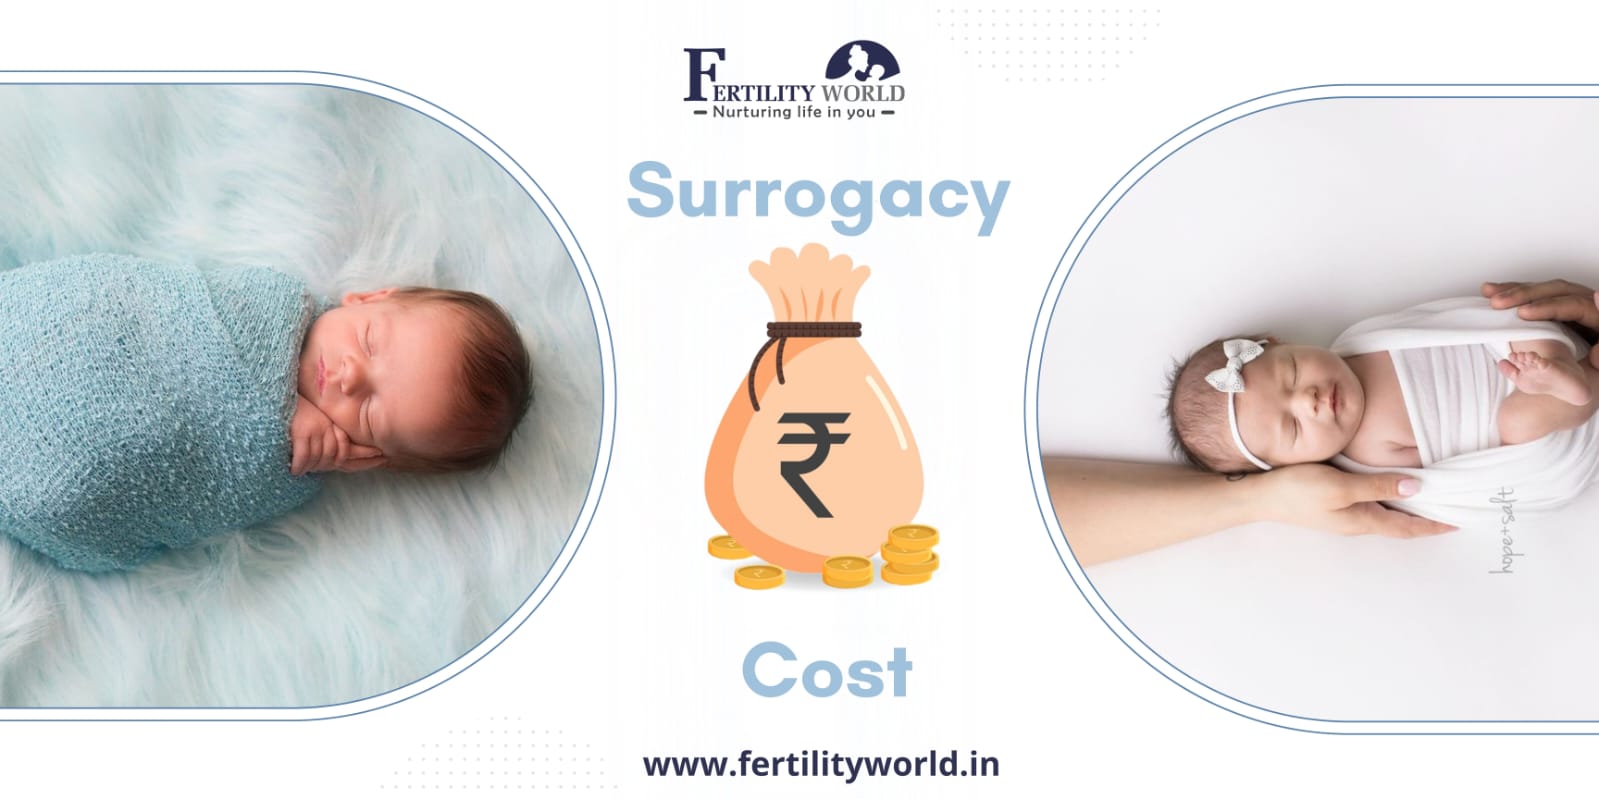 More details about the surrogacy cost in Chandigarh